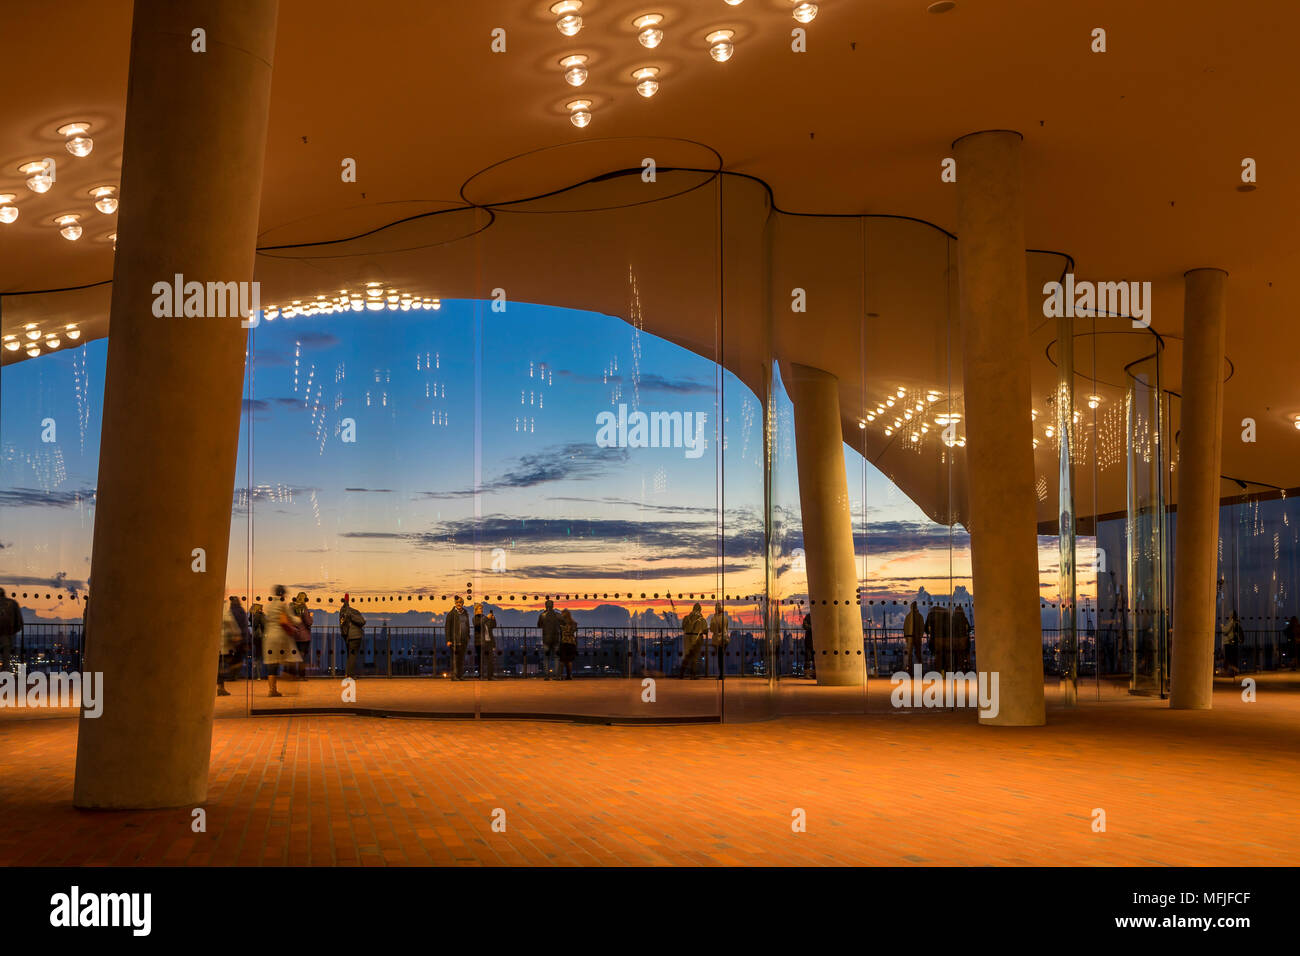 View from the Plaza of the Elbphilharmonie building at sunset, Hamburg, Germany, Europe Stock Photo